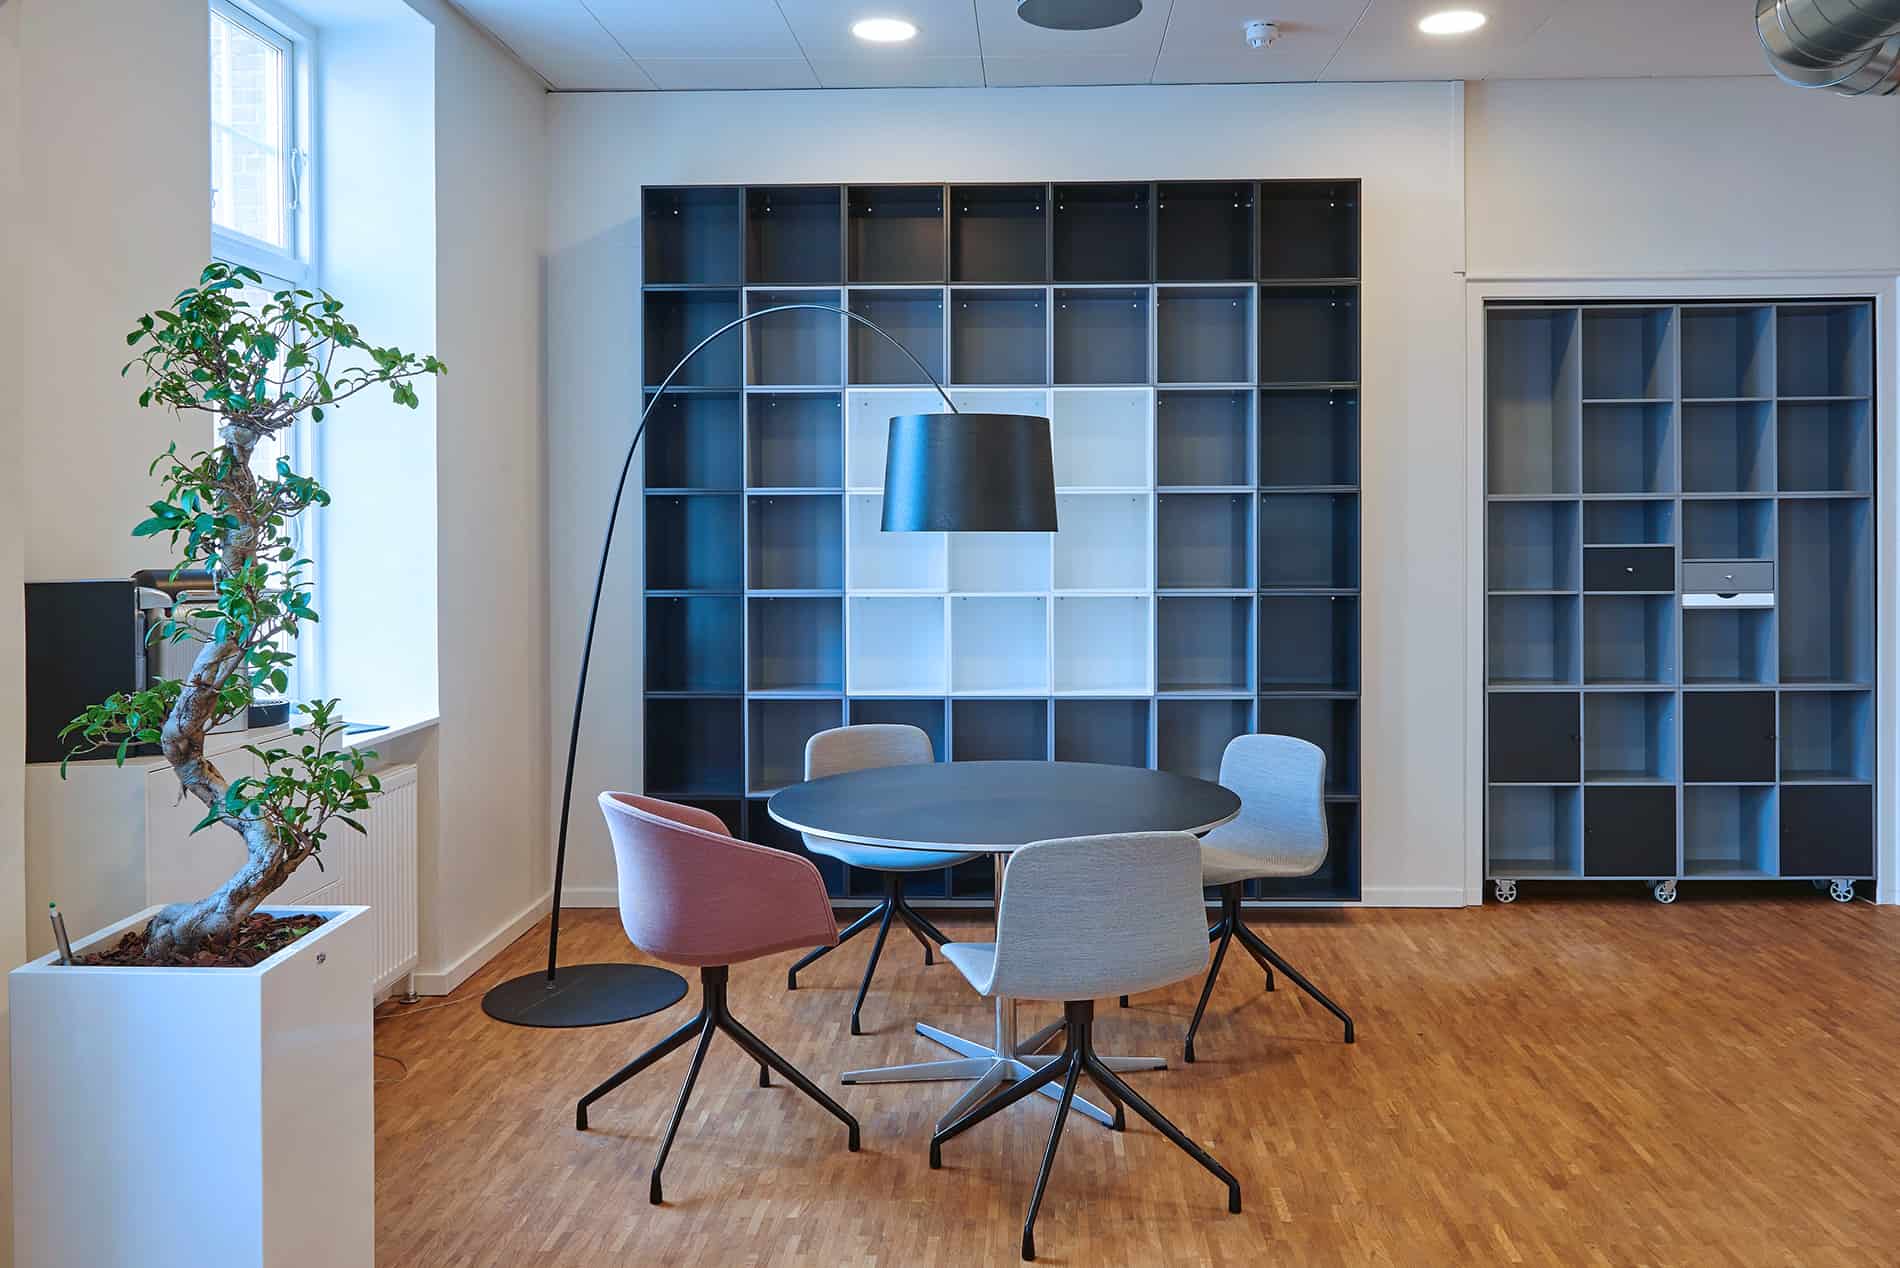 Office Space Design Tips